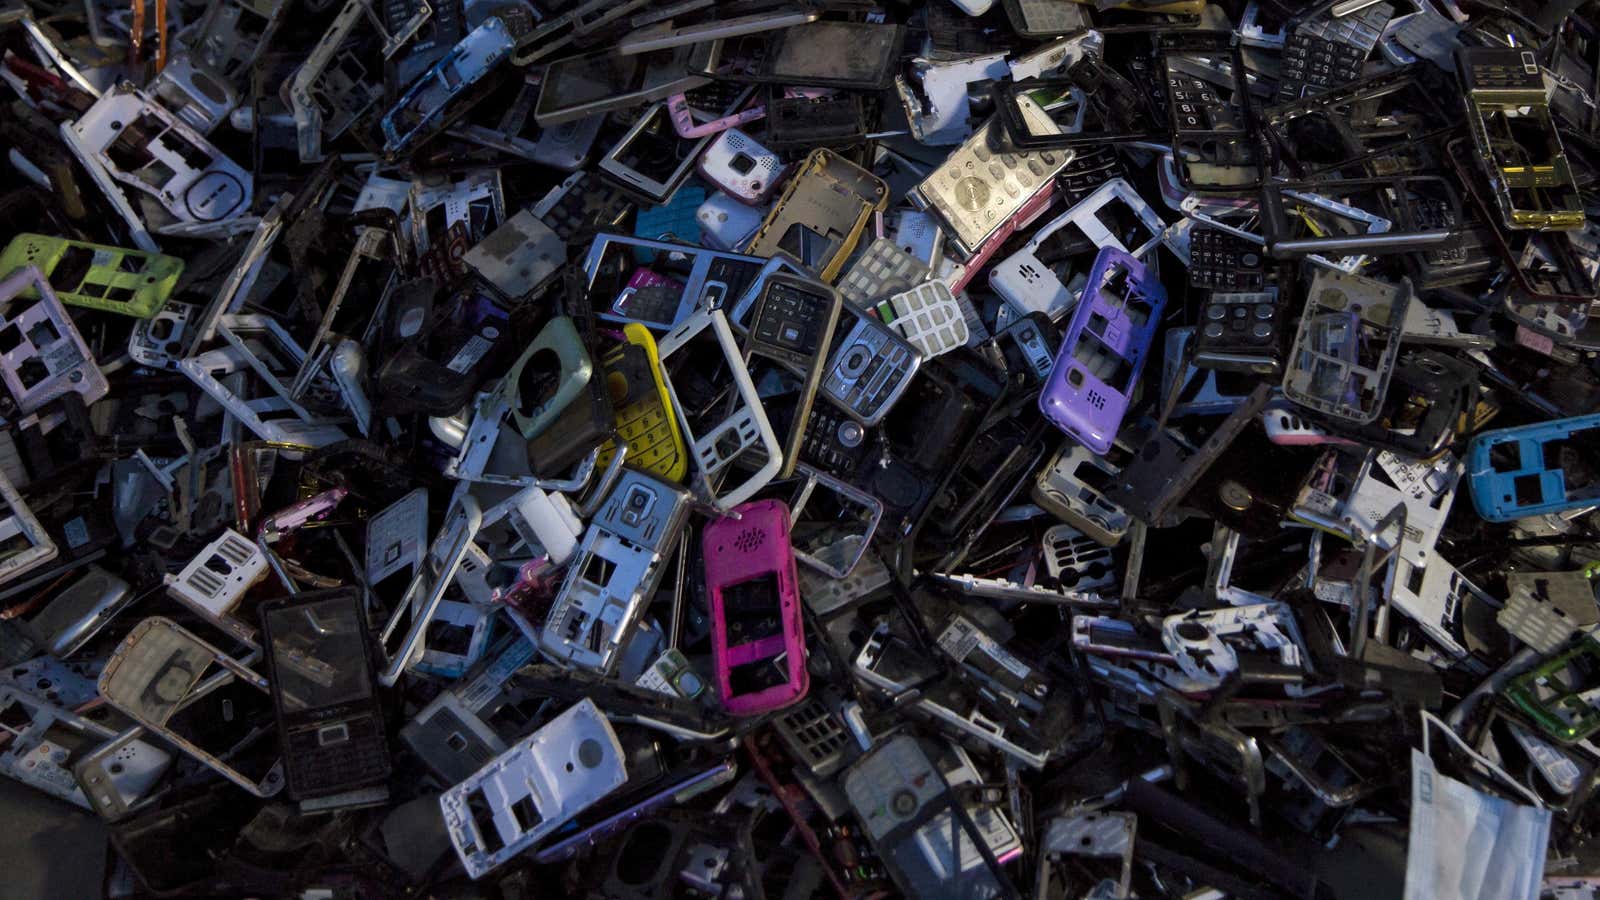 Asia is dumped 63% more e-waste in 2015 compared to 2010.